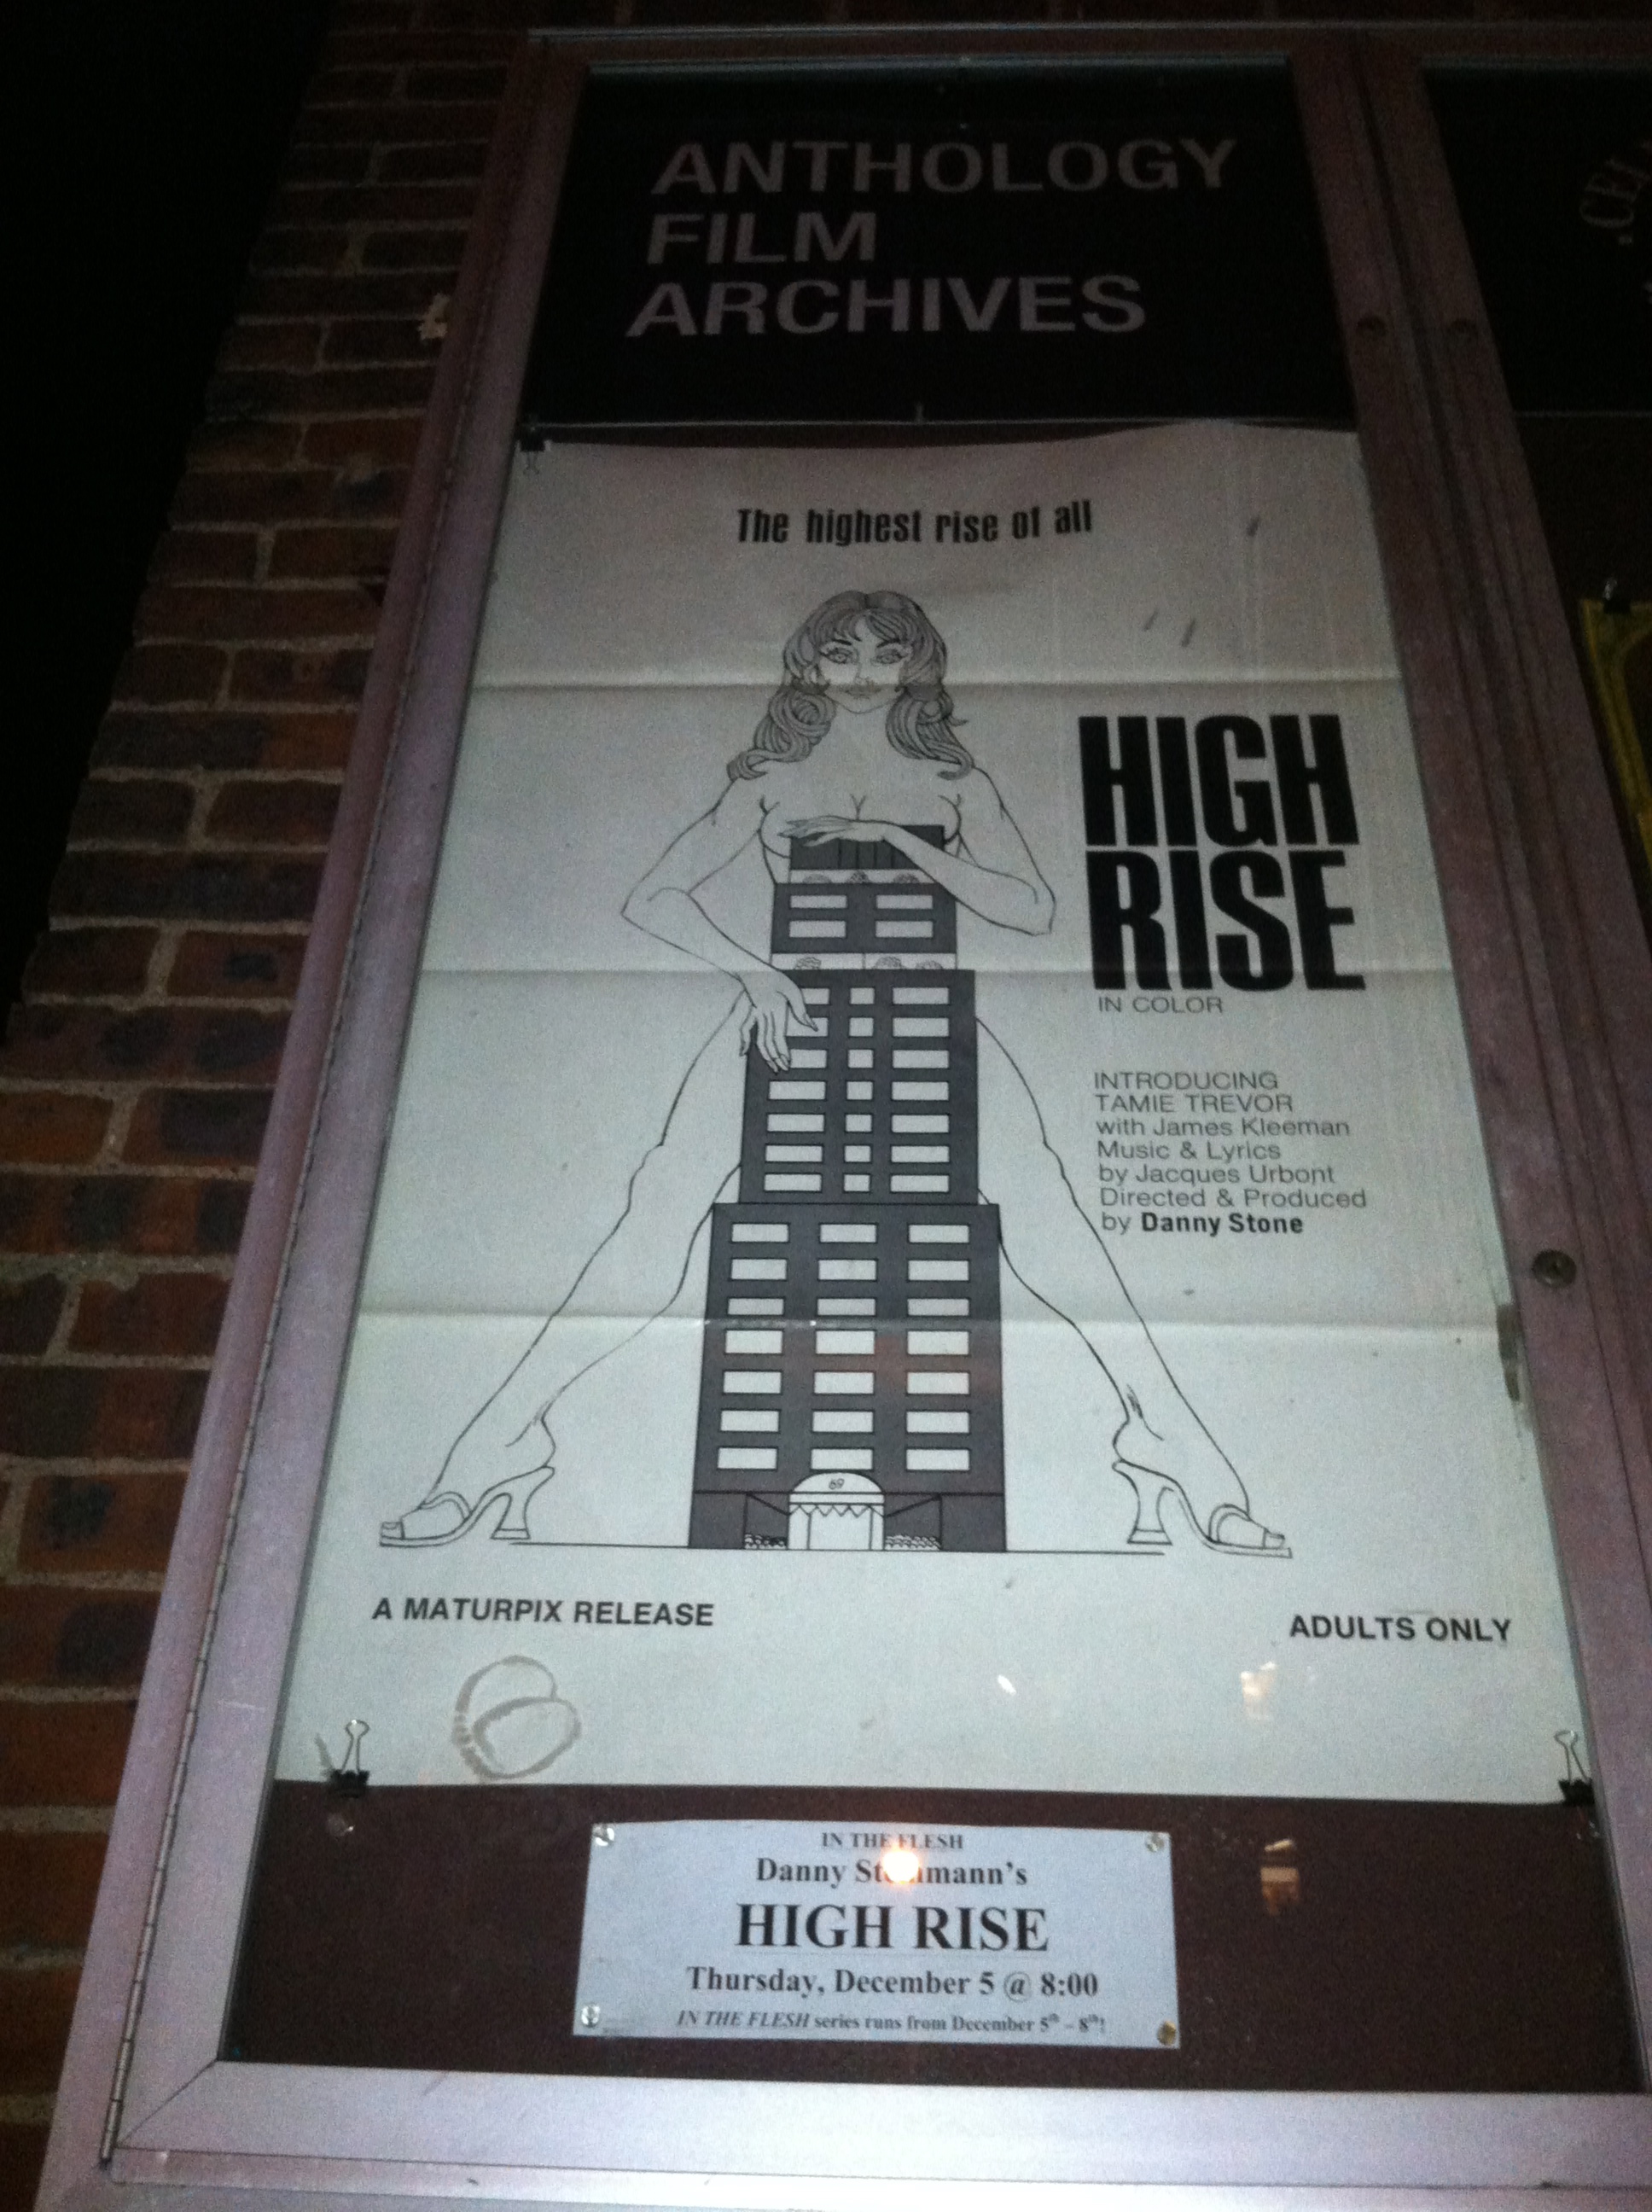 High Rise Movie Poster at Anthology Film Archives, facing 2nd avenue.